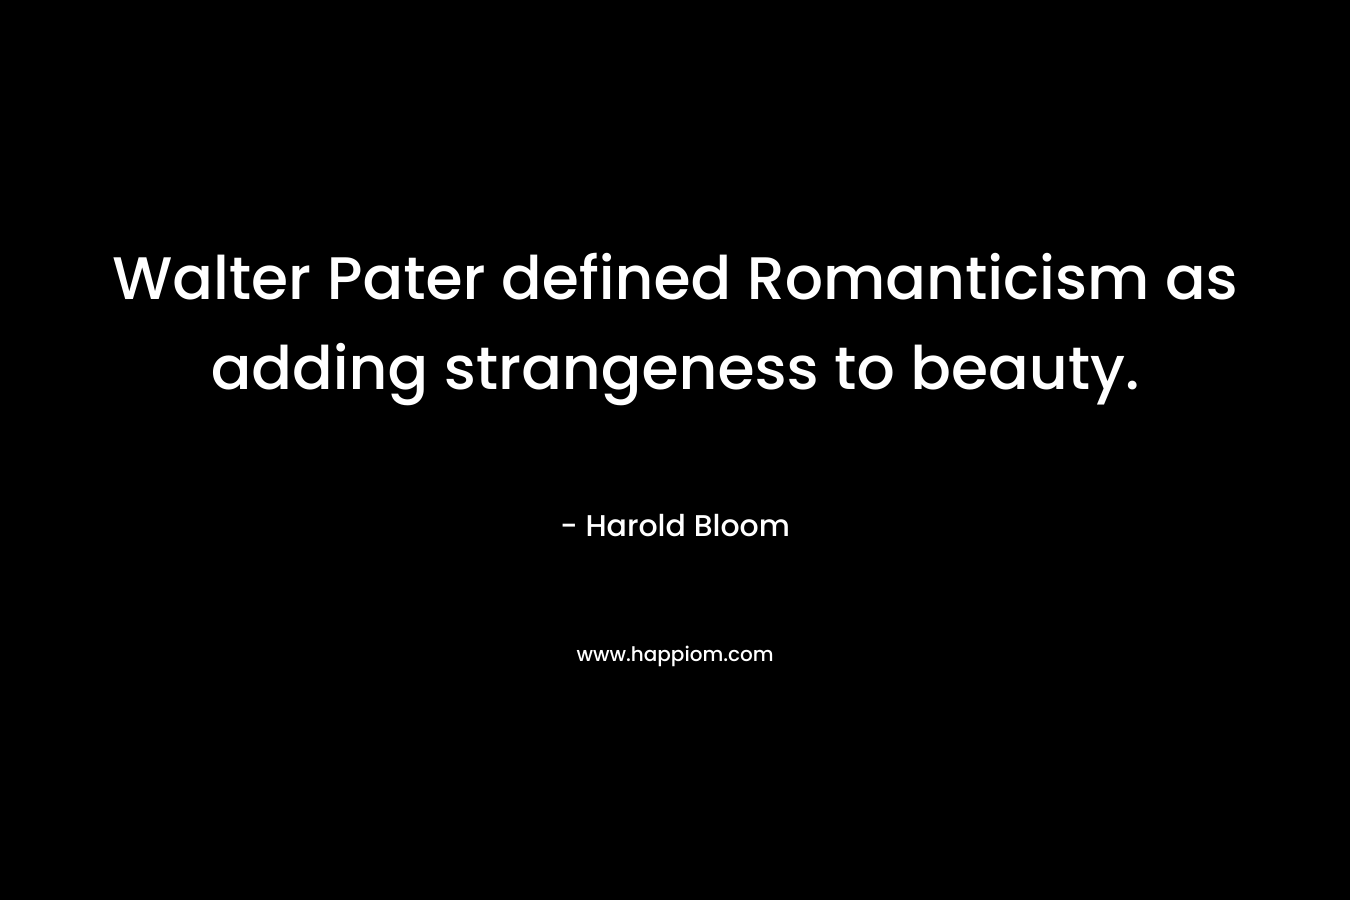 Walter Pater defined Romanticism as adding strangeness to beauty.